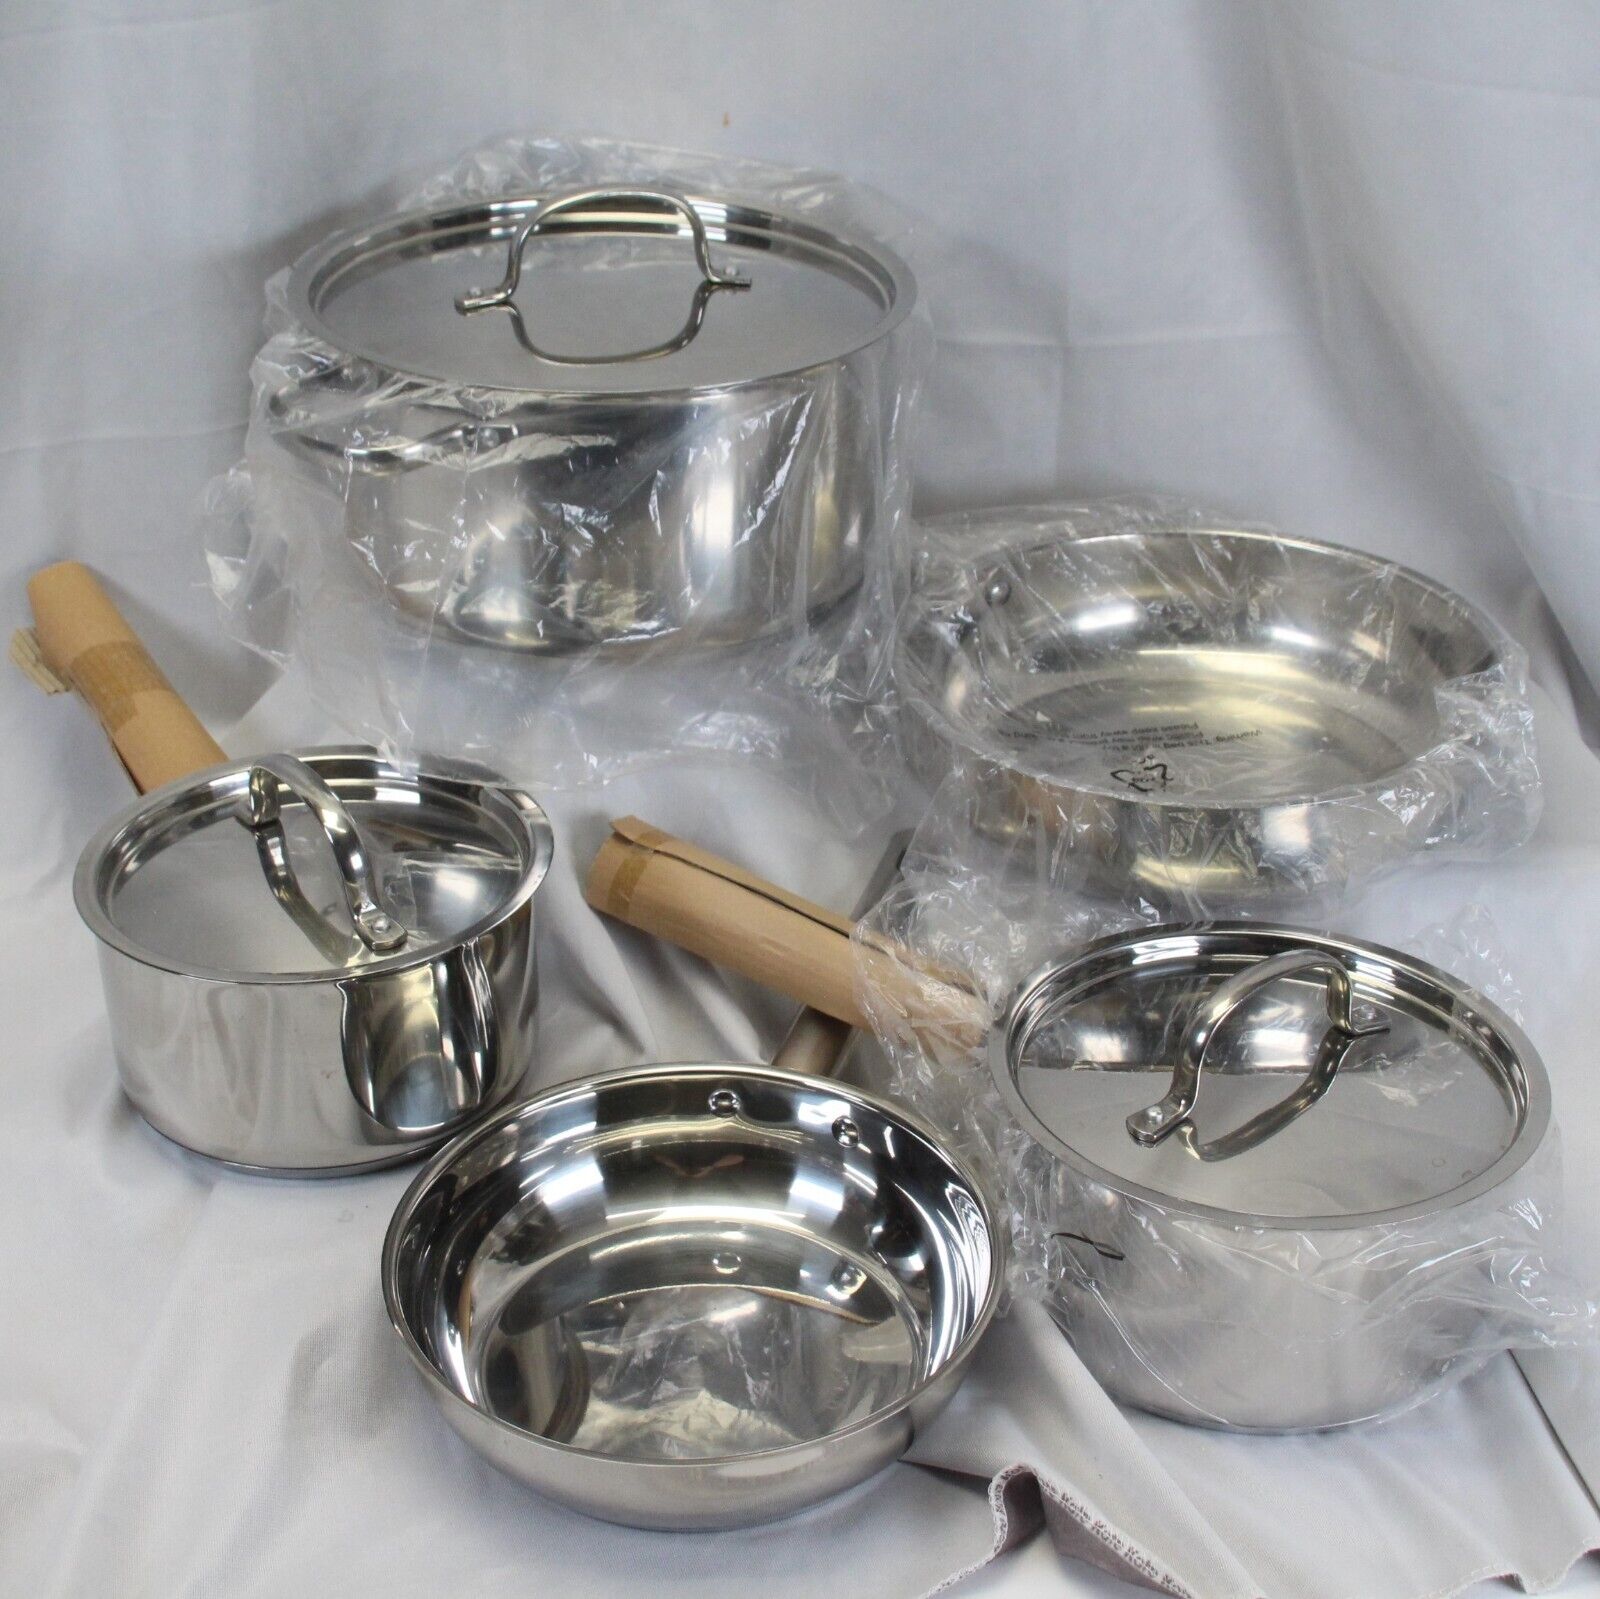 Cooking Club of America Pan Set Lot of 8 Lightly Used!